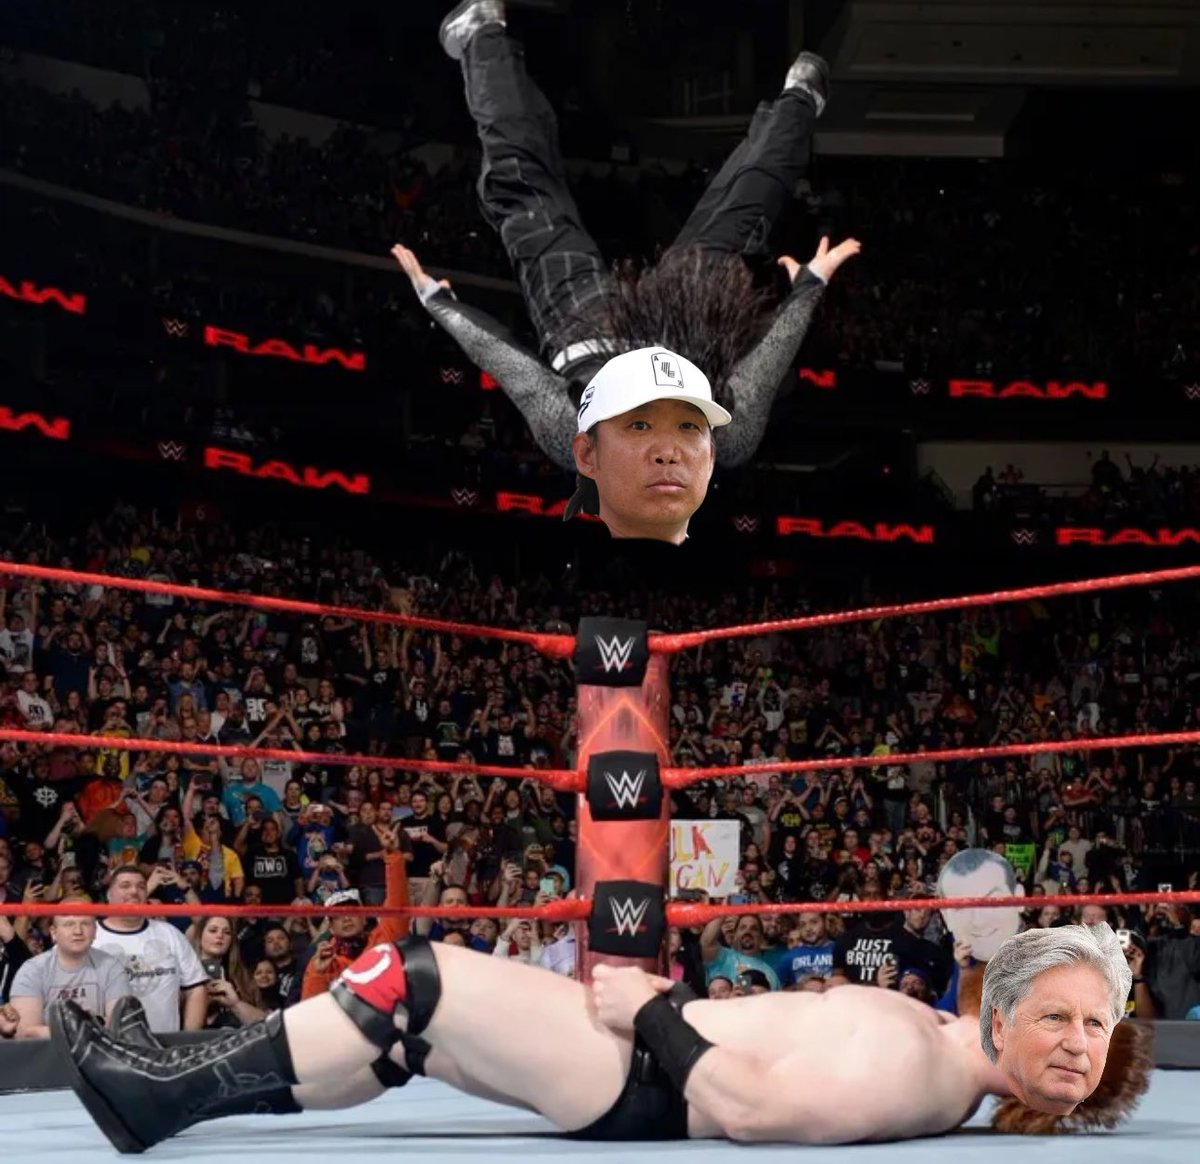 AK FROM THE TOP ROPE @AnthonyKim_Golf 

#BrandelTheCuck